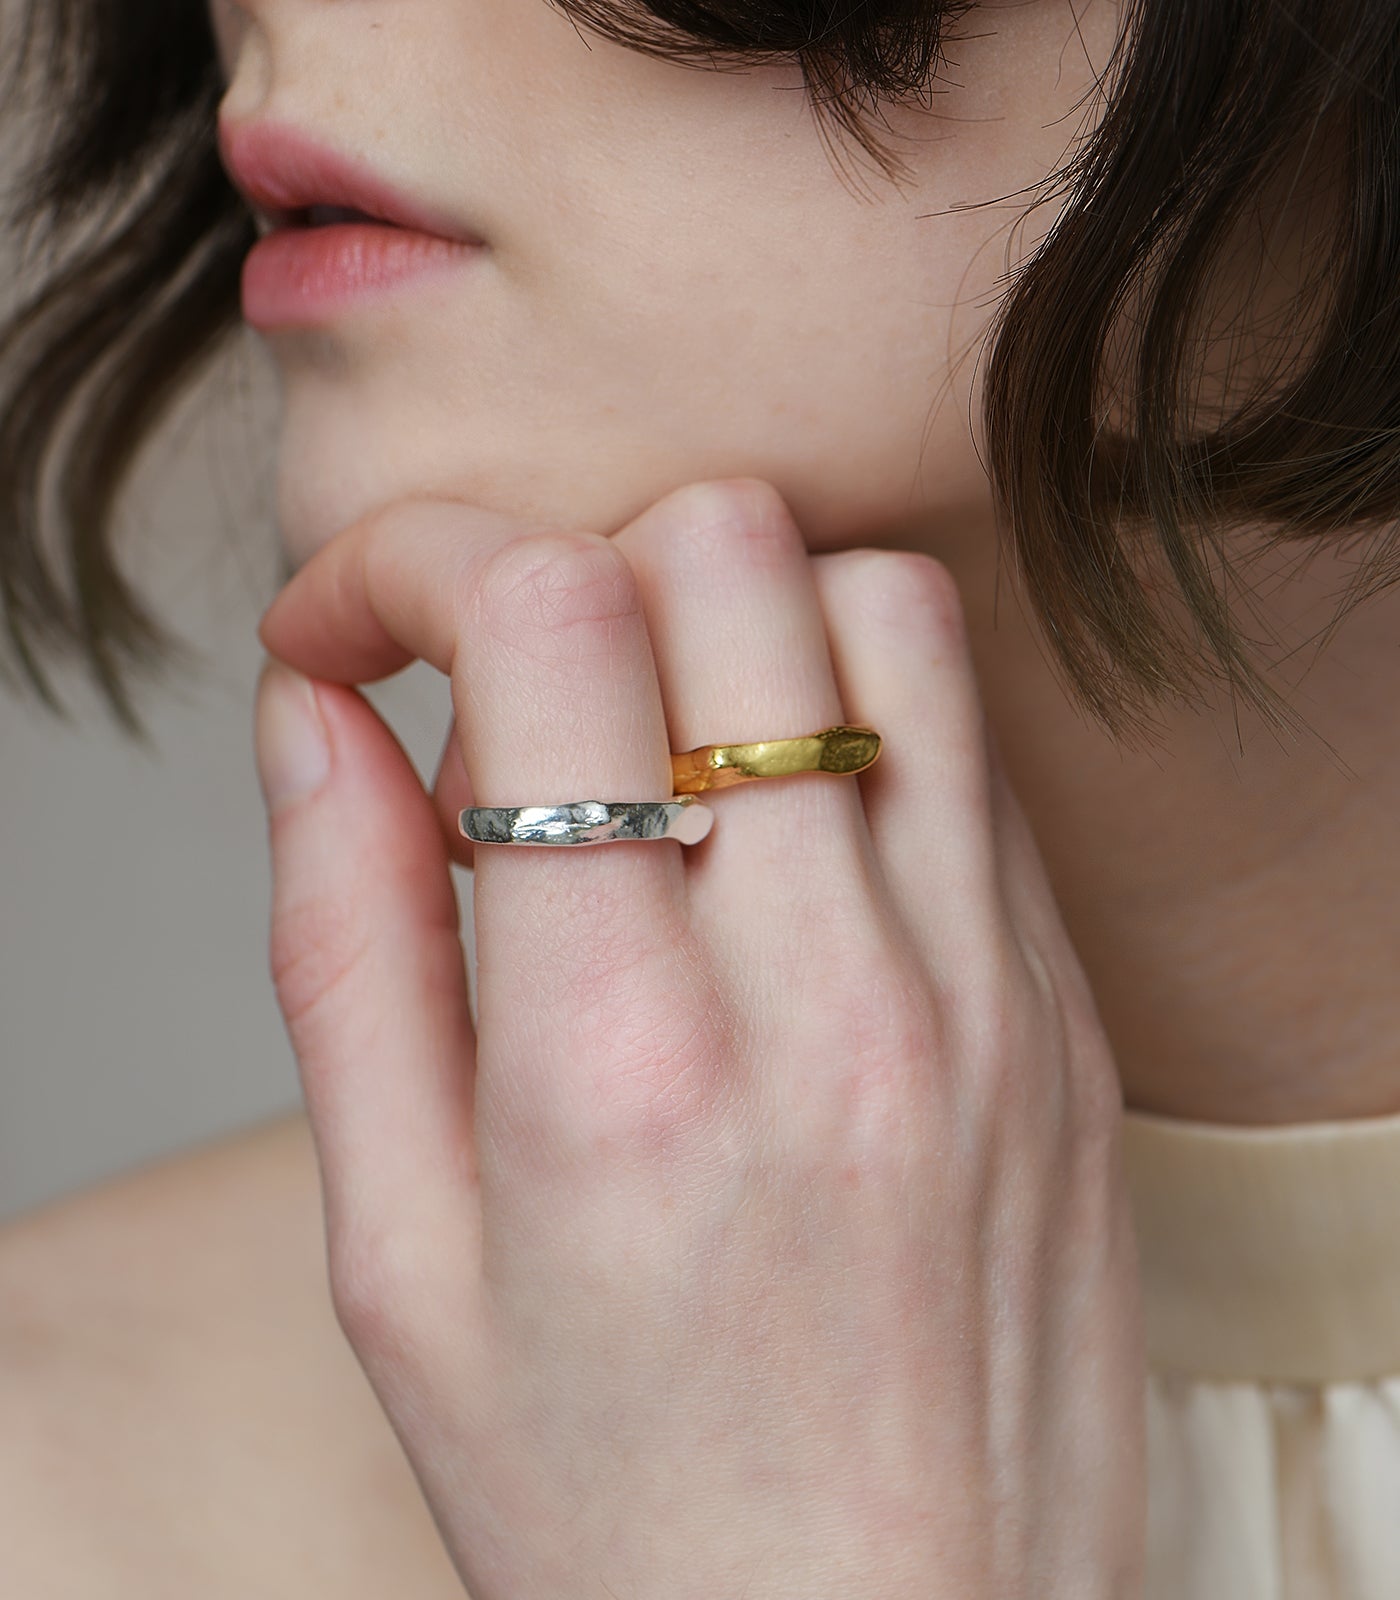 A model wears two silver and gold rings. The rings have a chunky band and organic rocky texture.